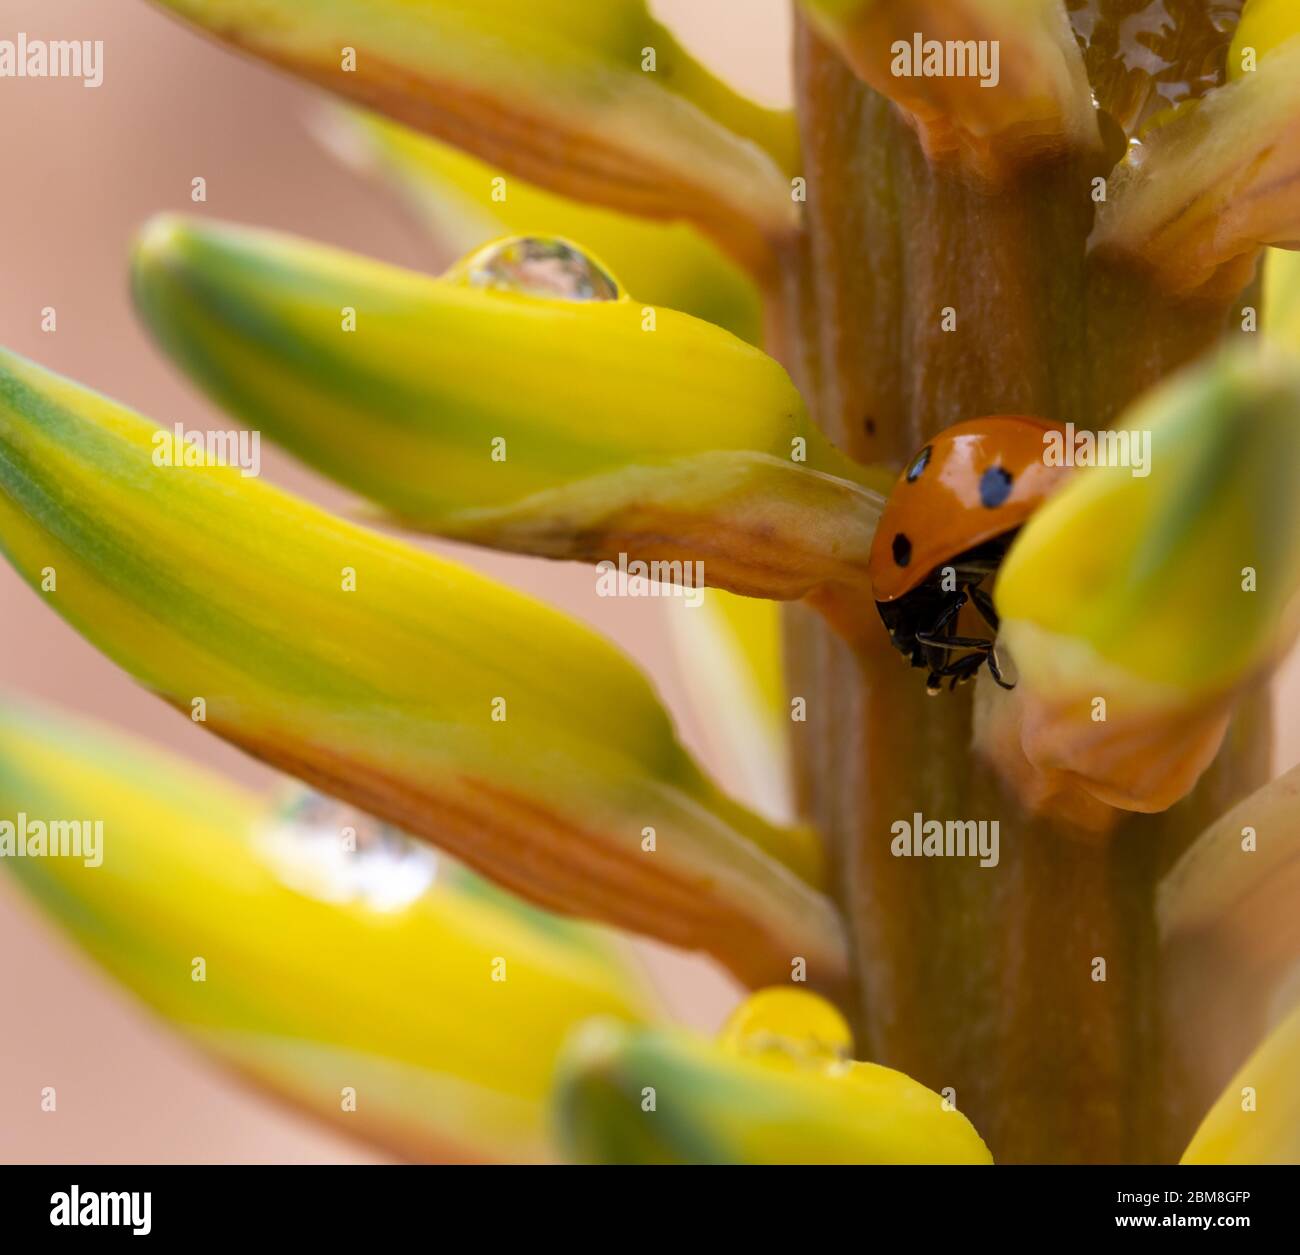 Detail of a ladybug walking among the petals of an aloe vera flower covered in raindrops Stock Photo